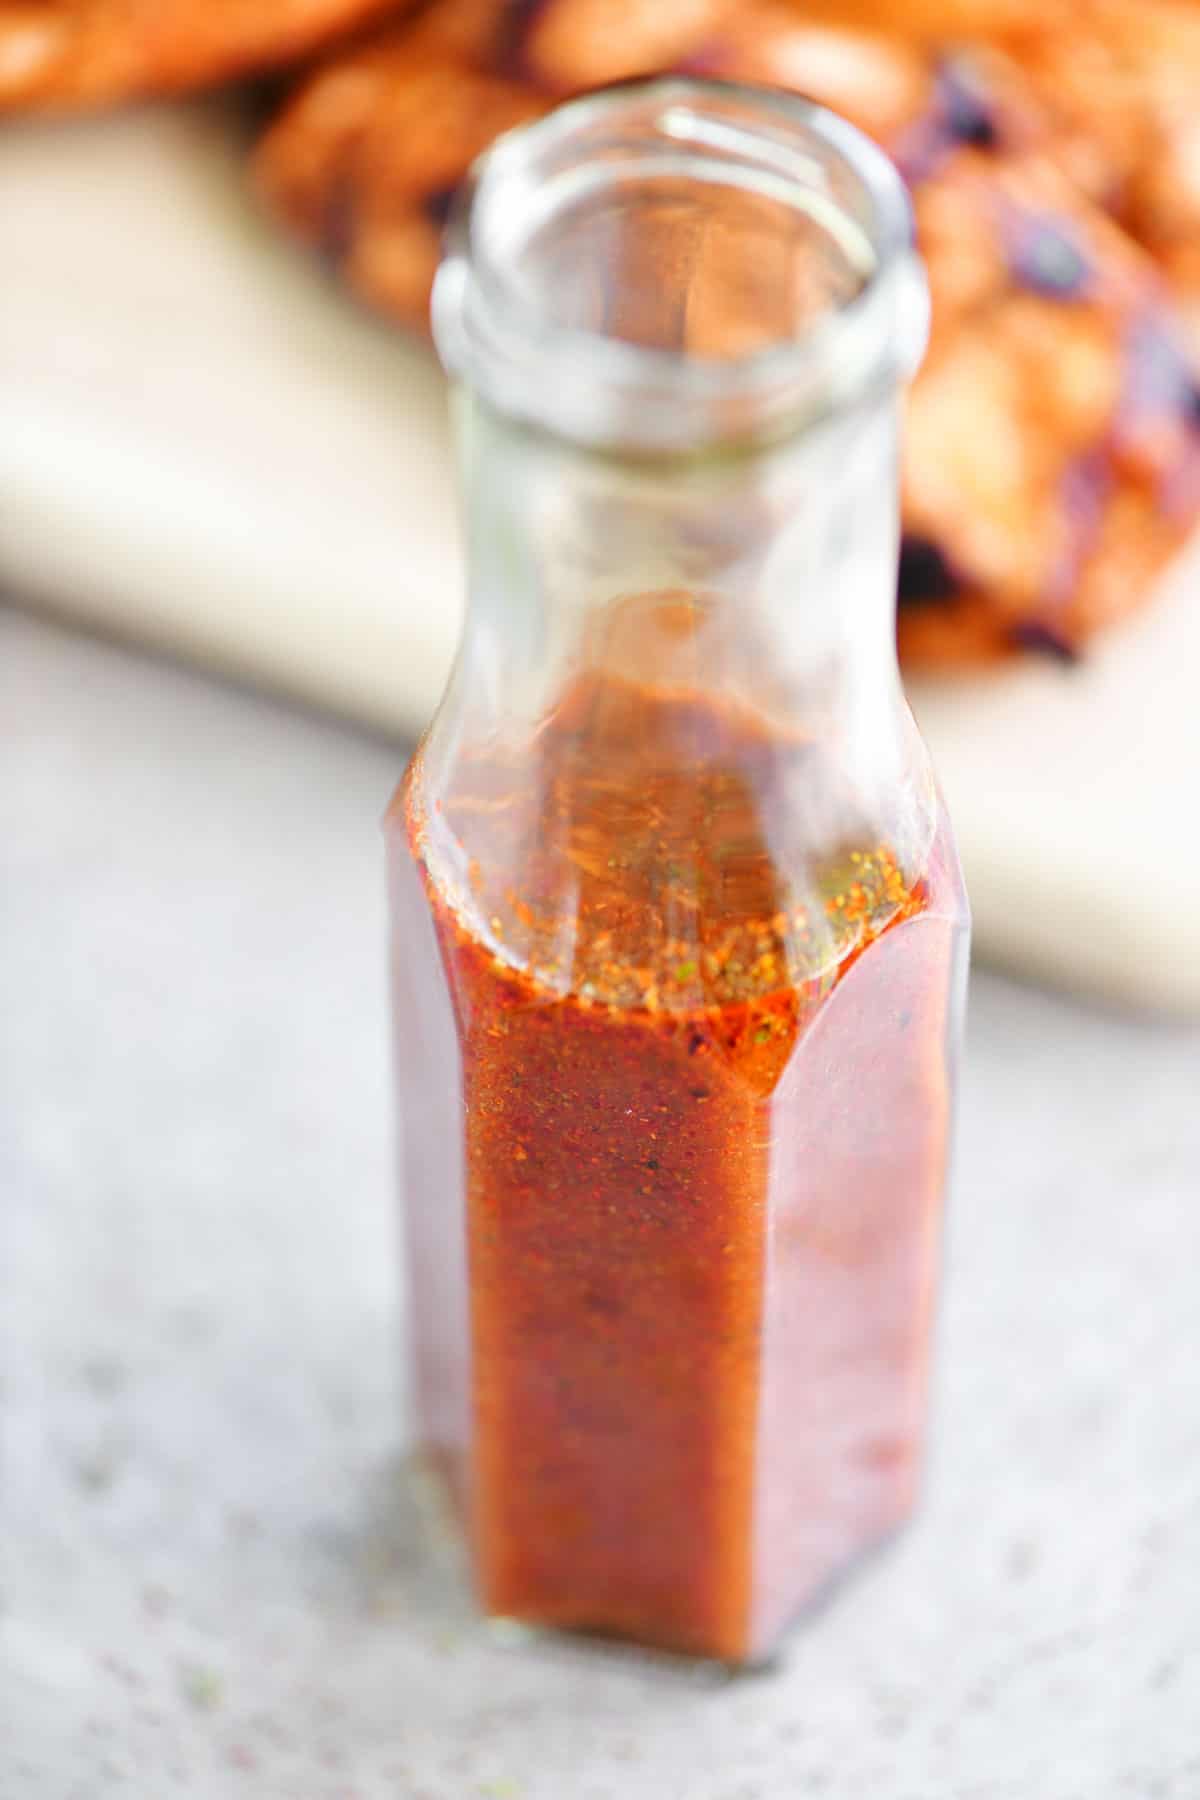 adobo pepper chipotle sauce in a glass bottle